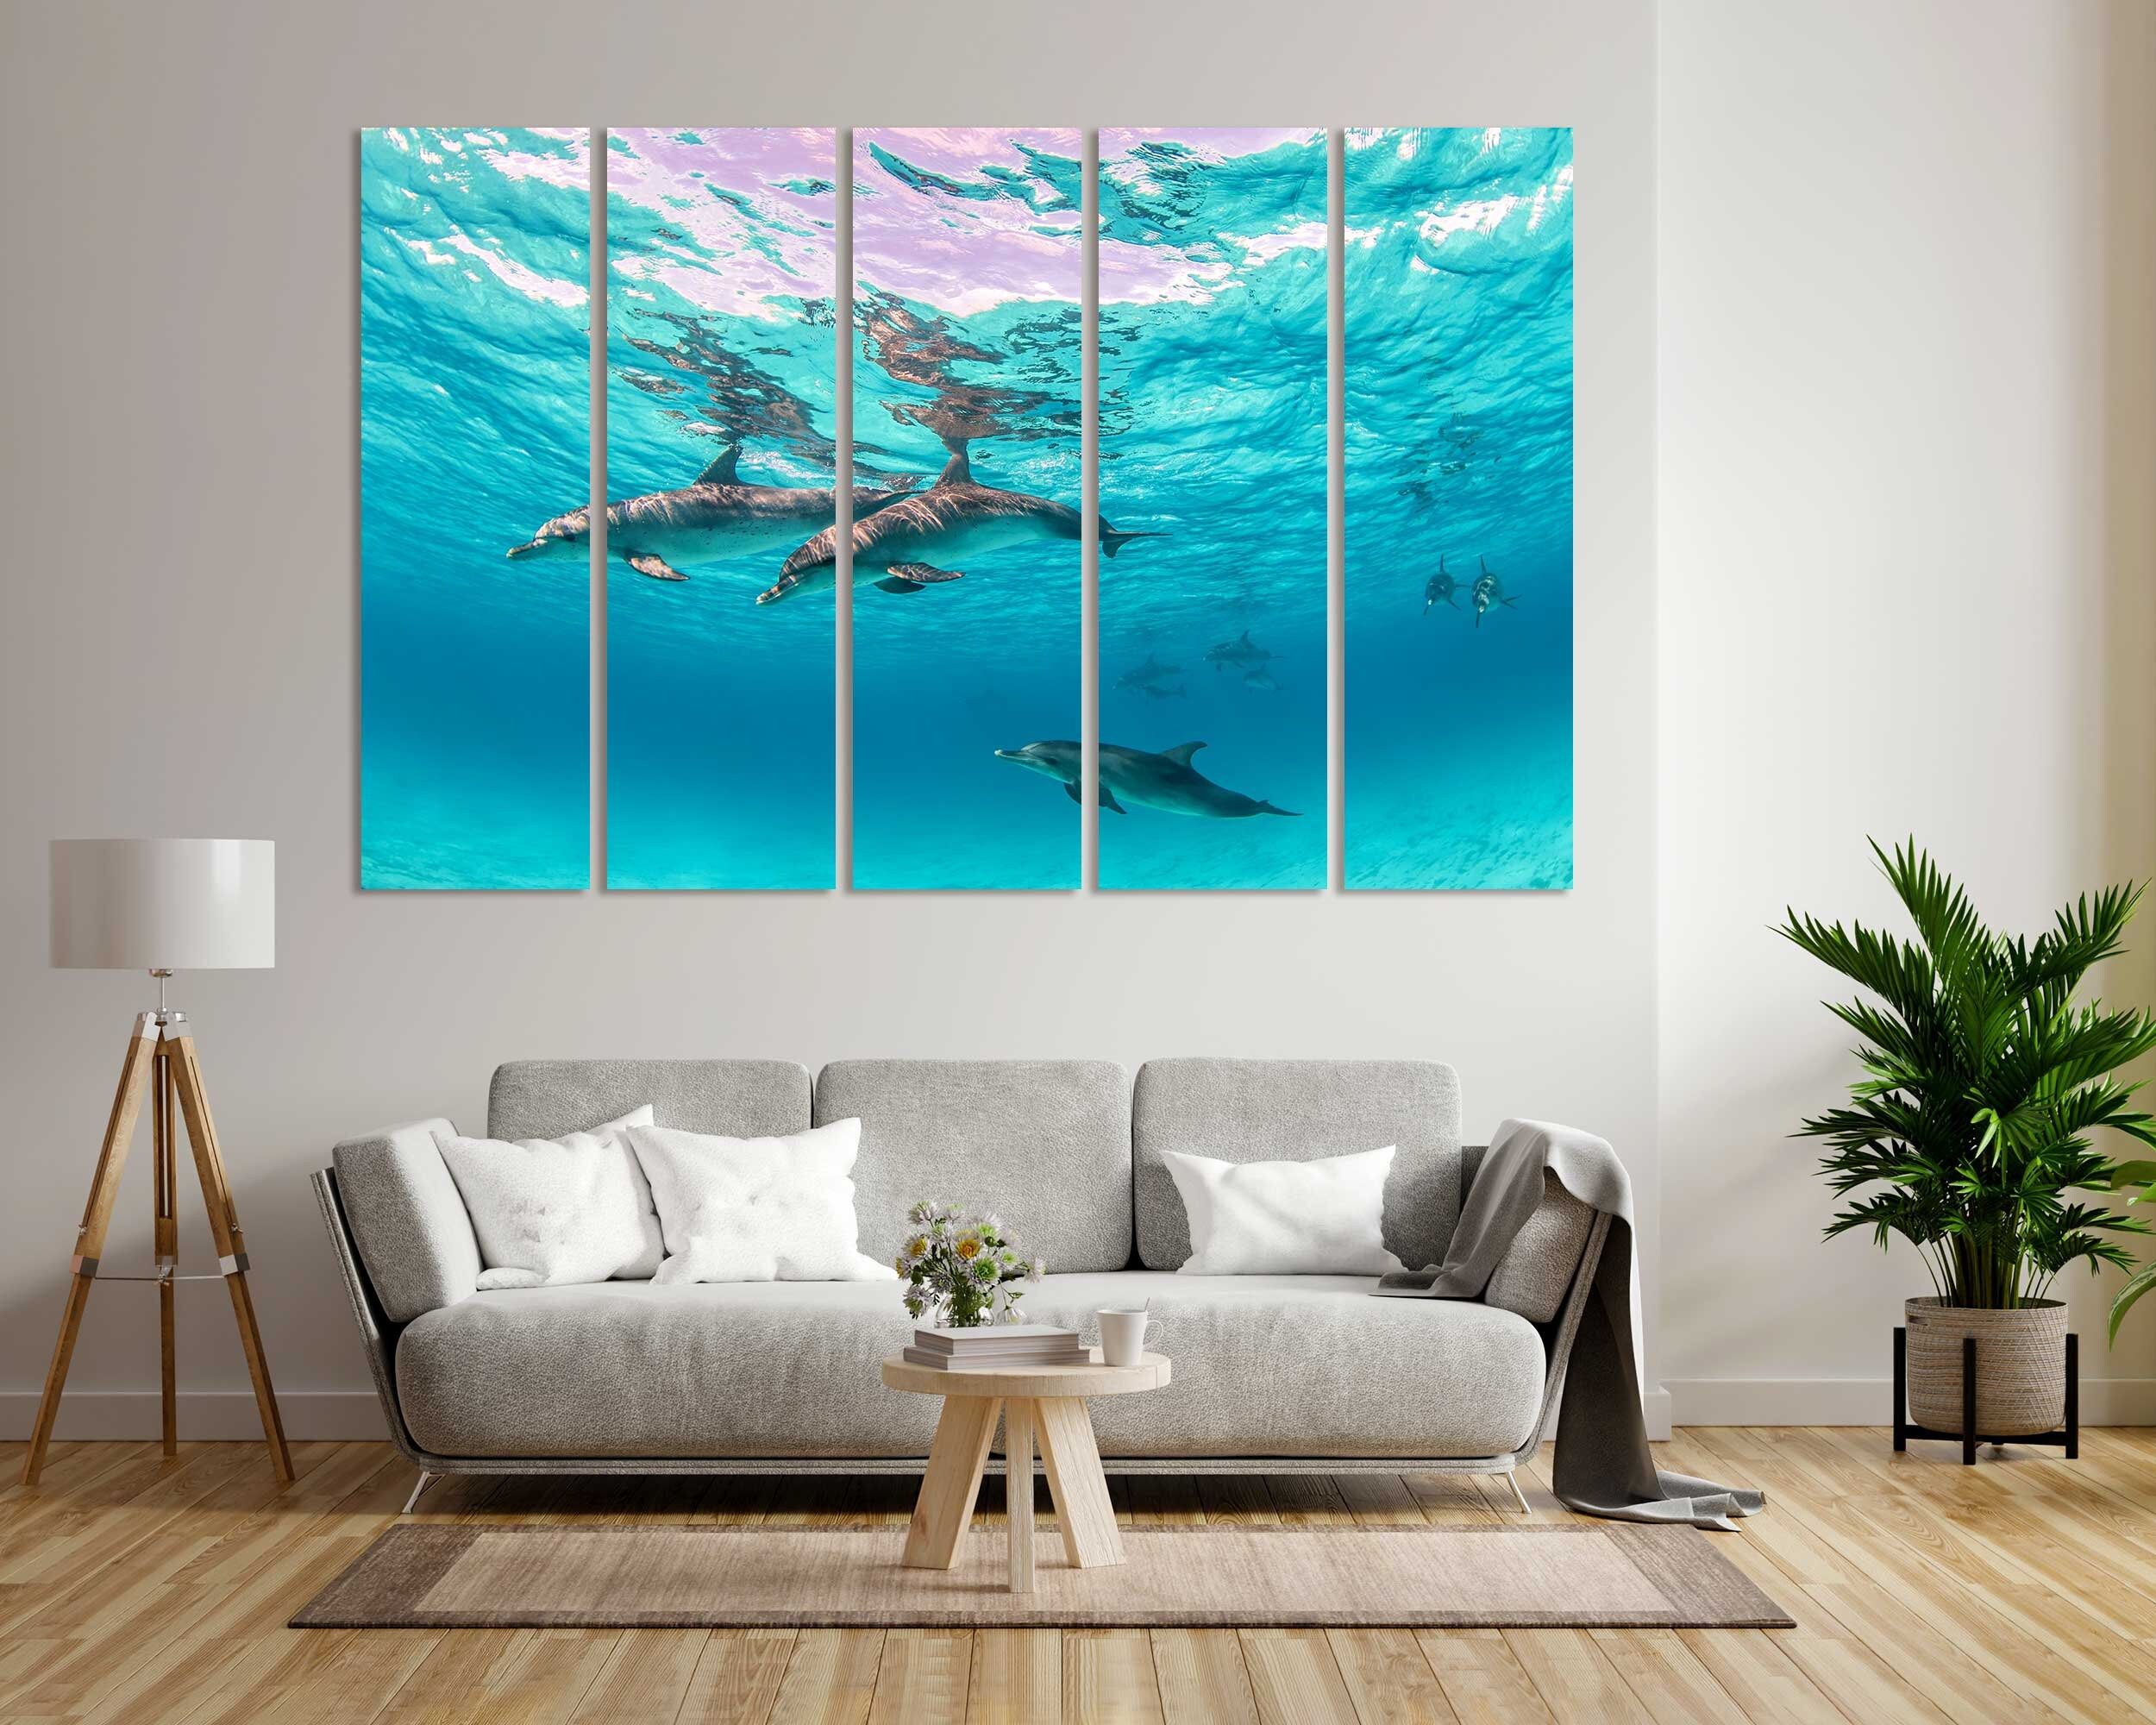 Cute Dolphins Underwater Original Art For Interior Decor Sea – Etsy Inside Most Recent Underwater Wood Wall Art (Gallery 14 of 20)